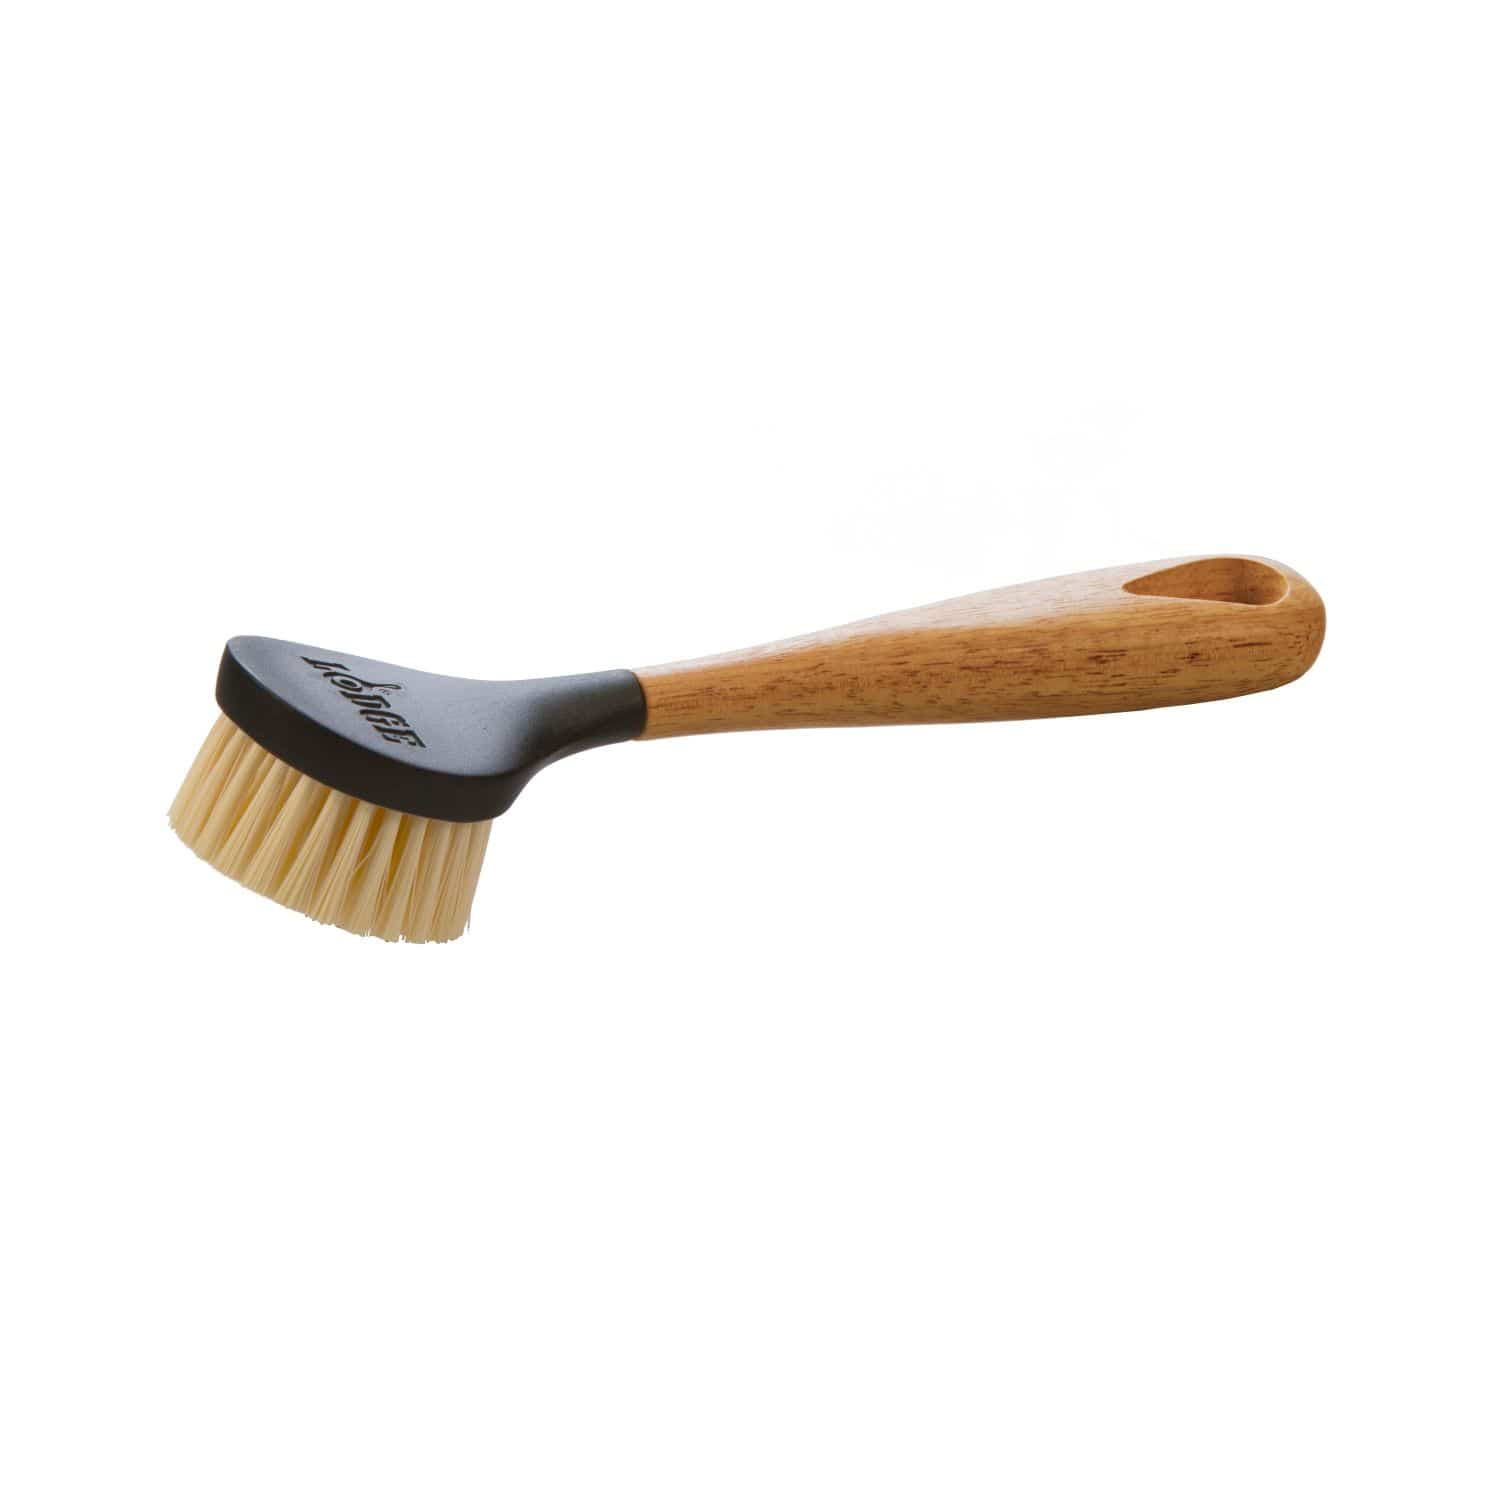 Lodge Mfg Camping & Outdoor : Cooking Lodge 10 Inch Scrub Brush